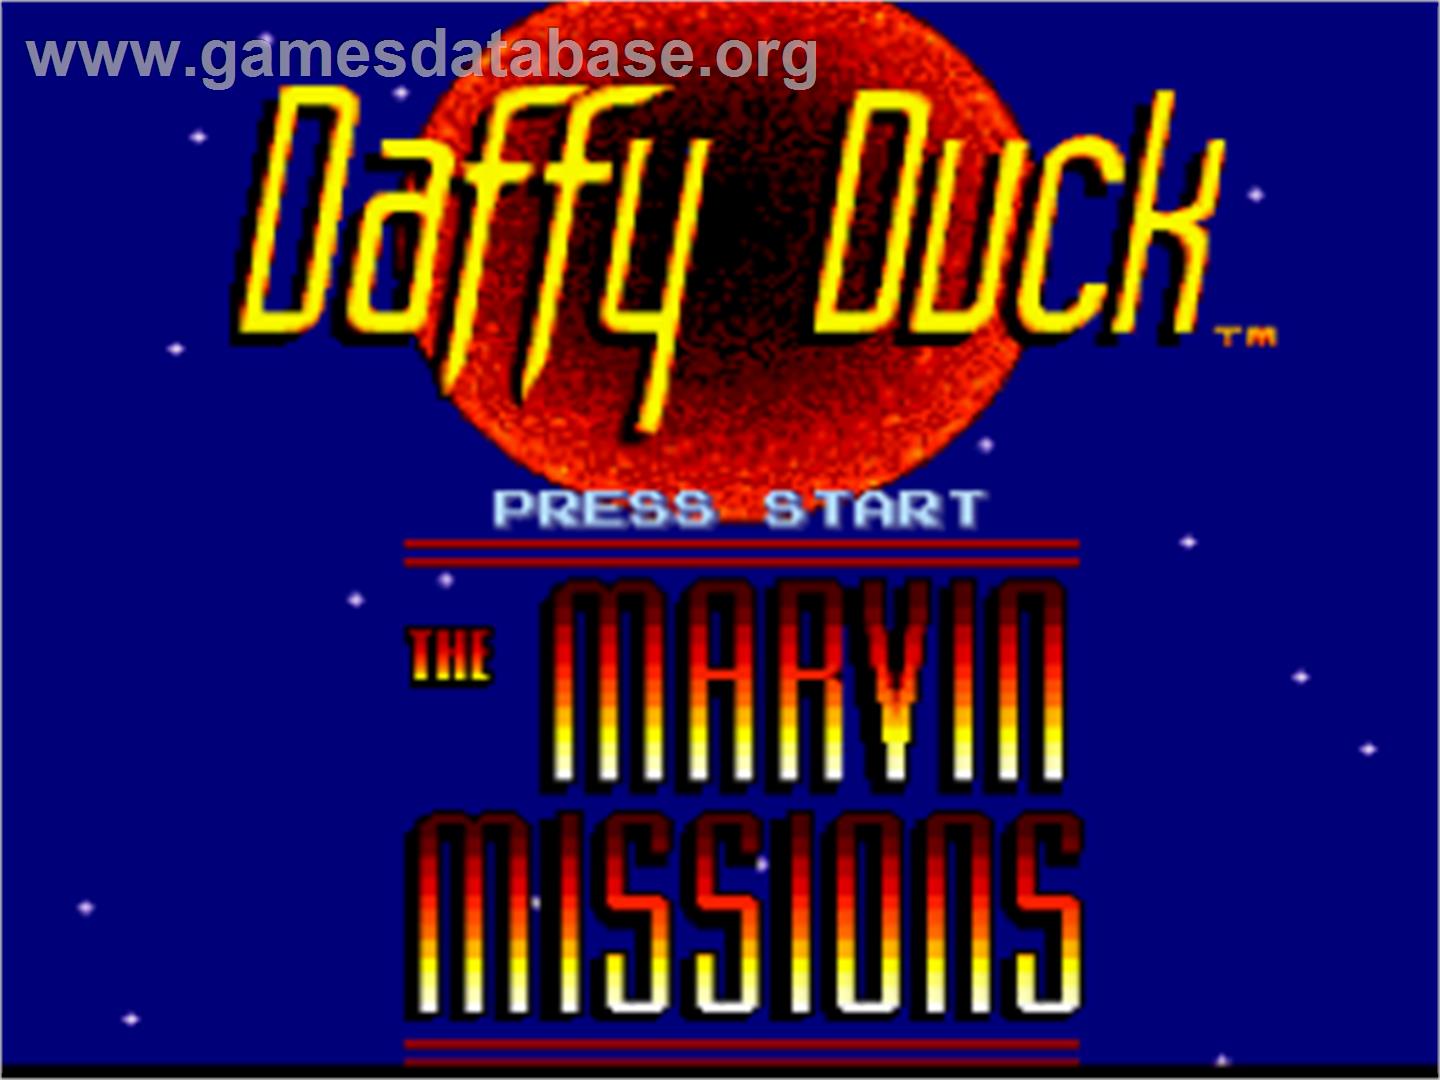 Daffy Duck: The Marvin Missions - Nintendo SNES - Artwork - Title Screen